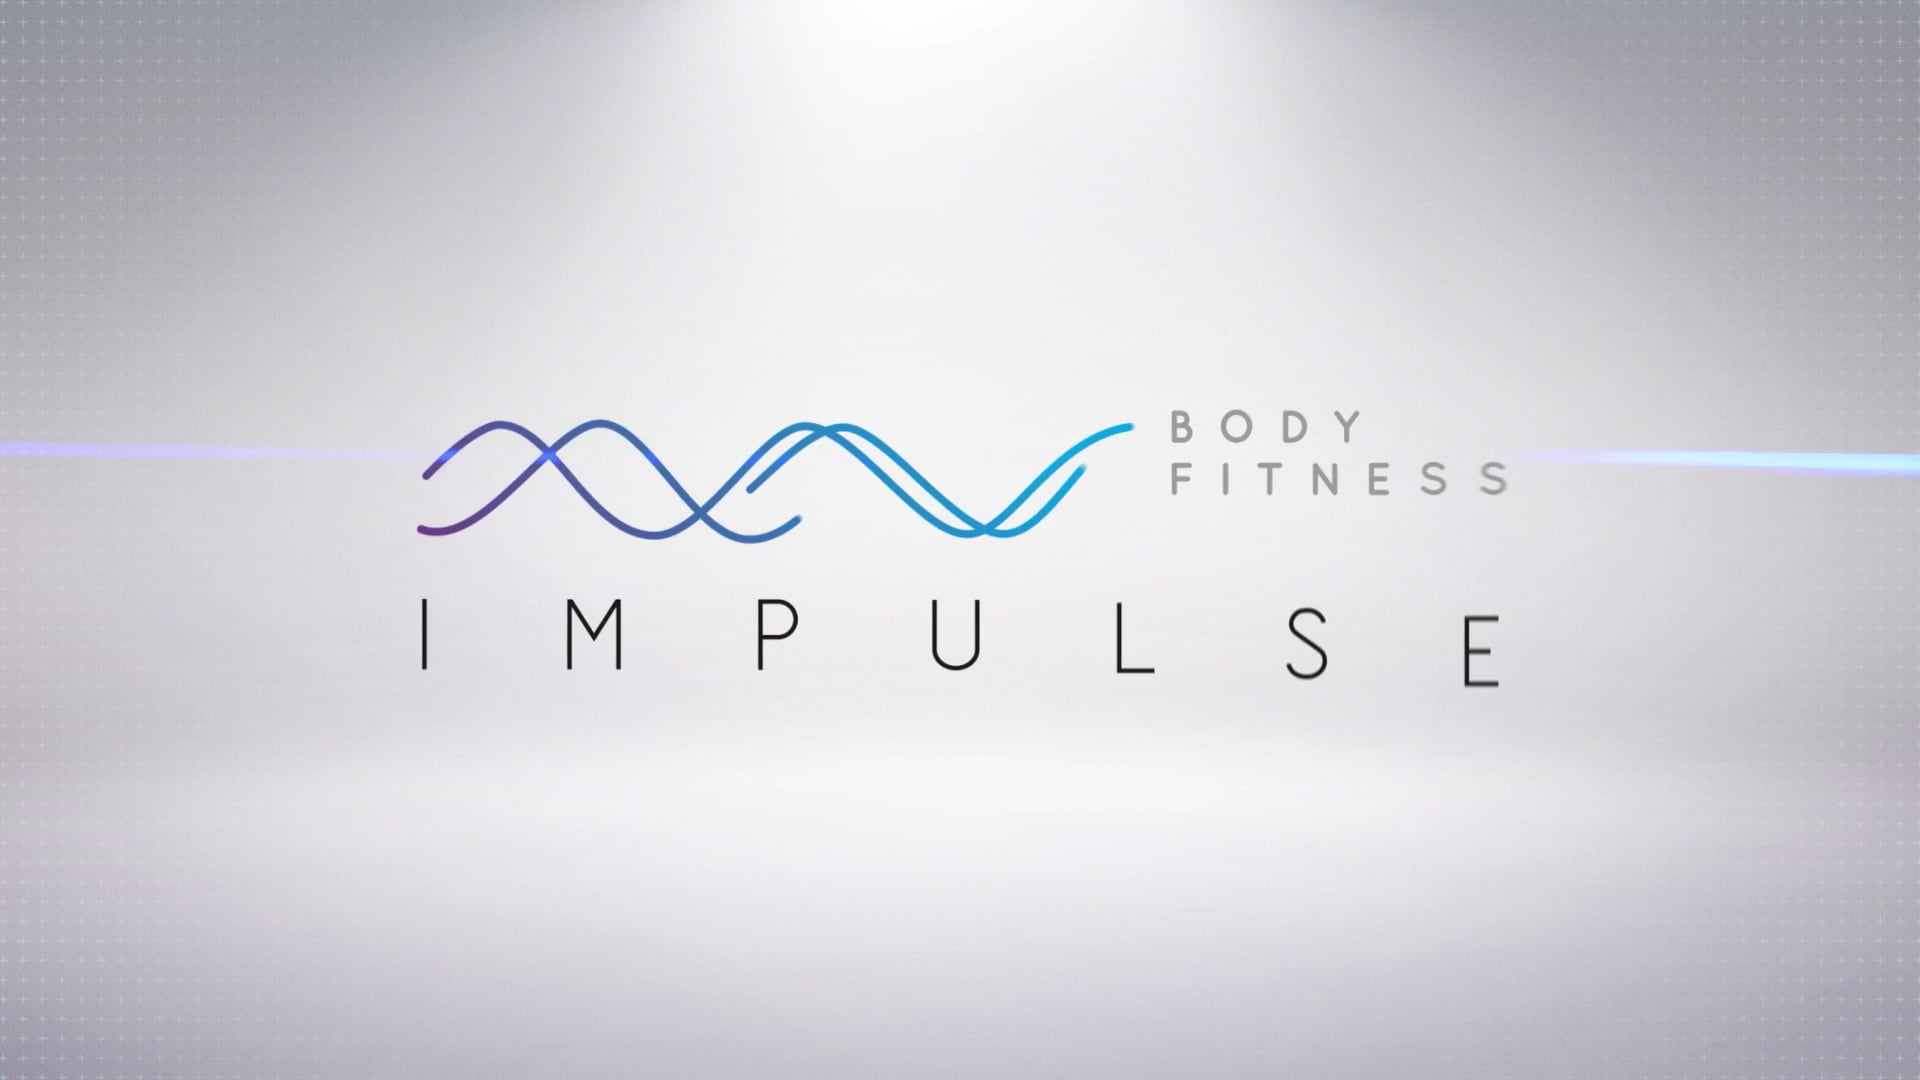 Institutional Fitness Video